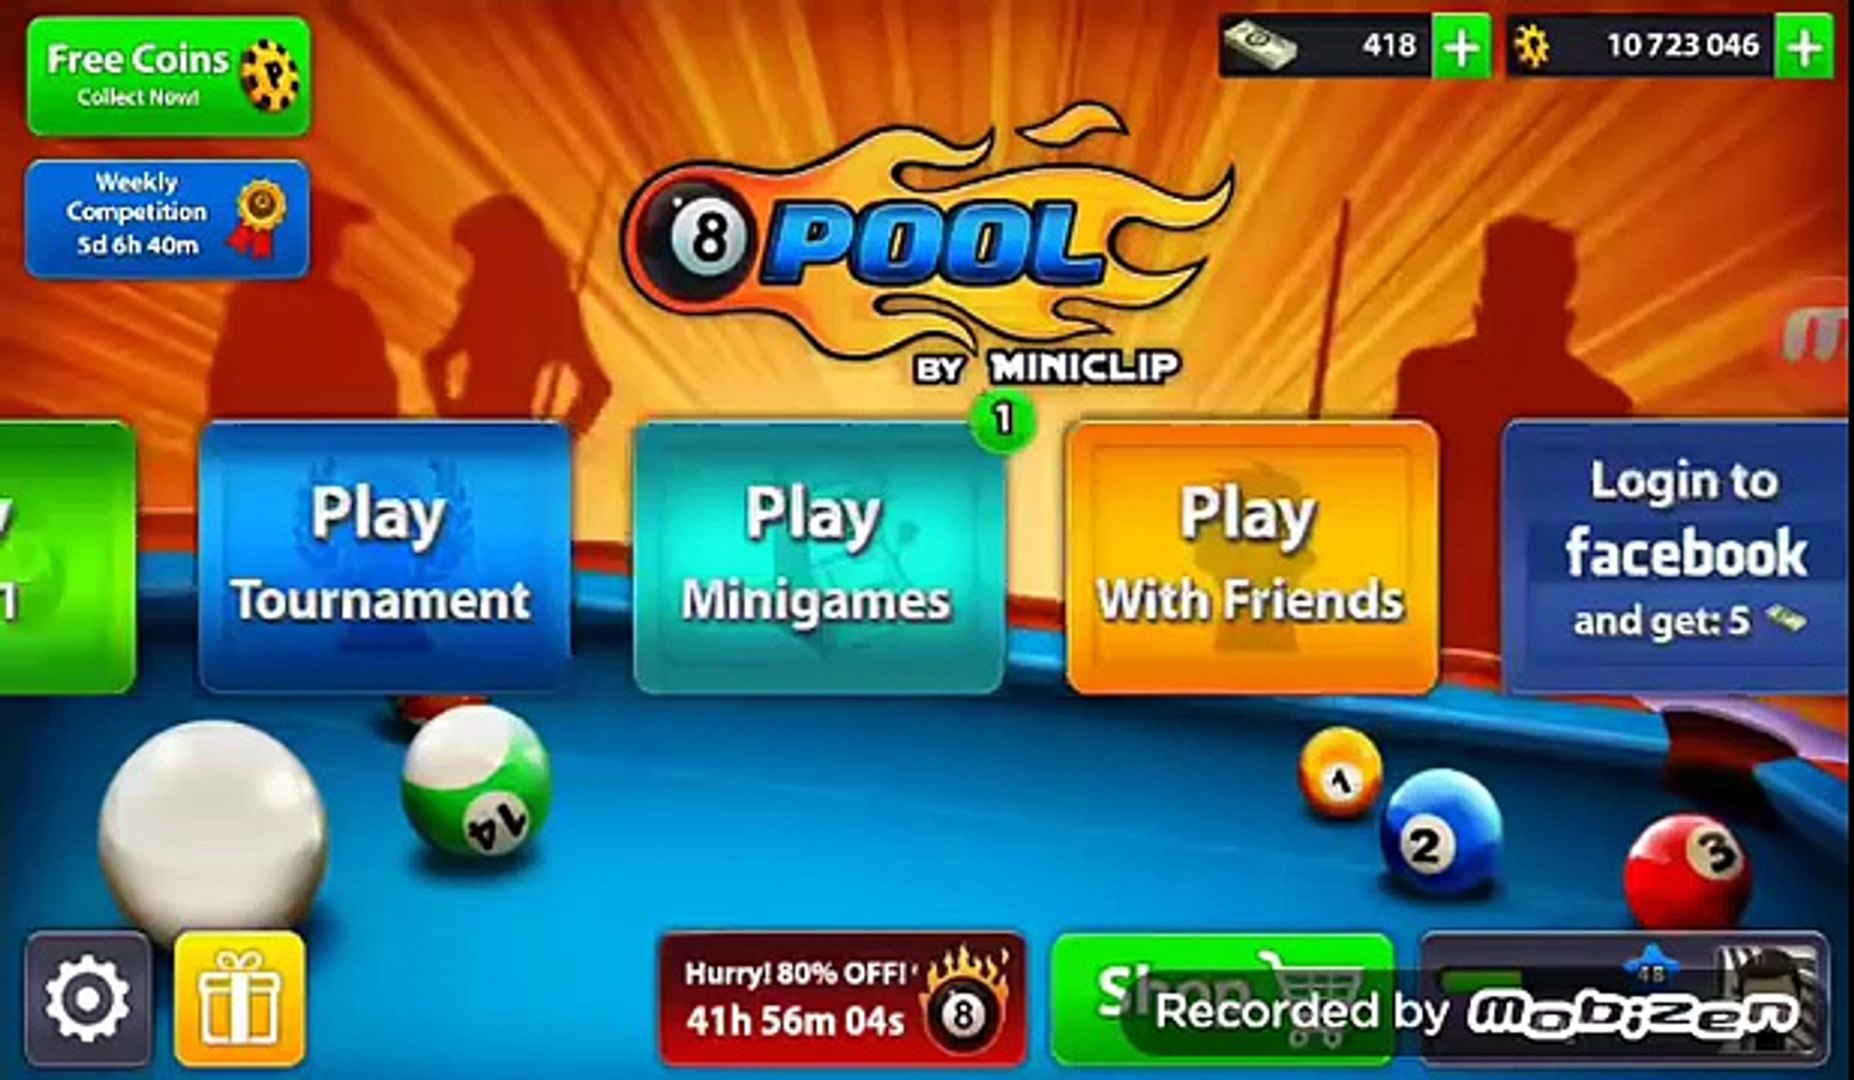 8 Ball Pool cash trick with easy steps - - 